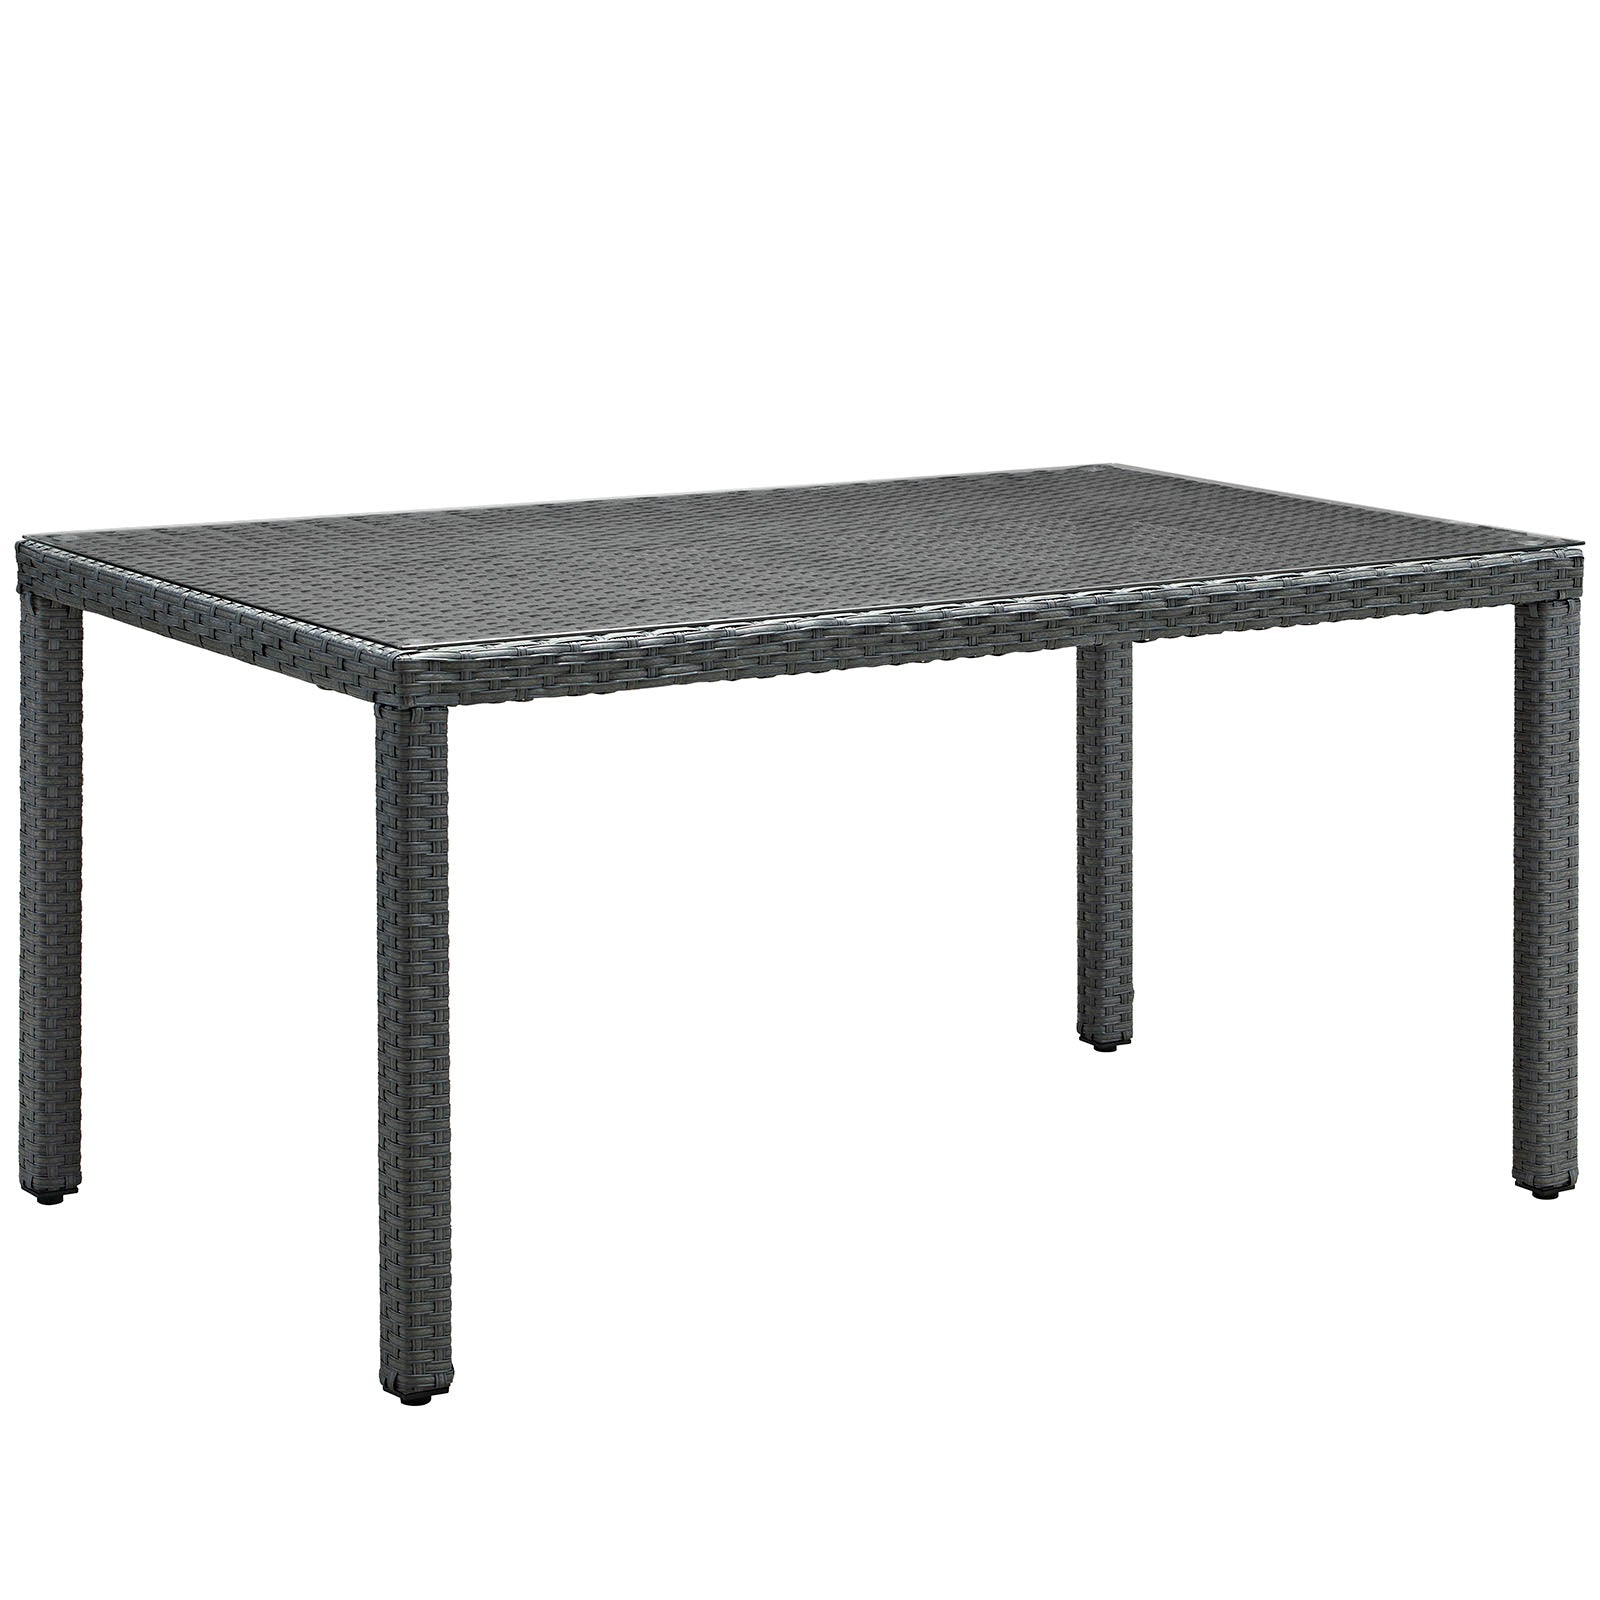 Sojourn 59" Outdoor Patio Dining Table - East Shore Modern Home Furnishings